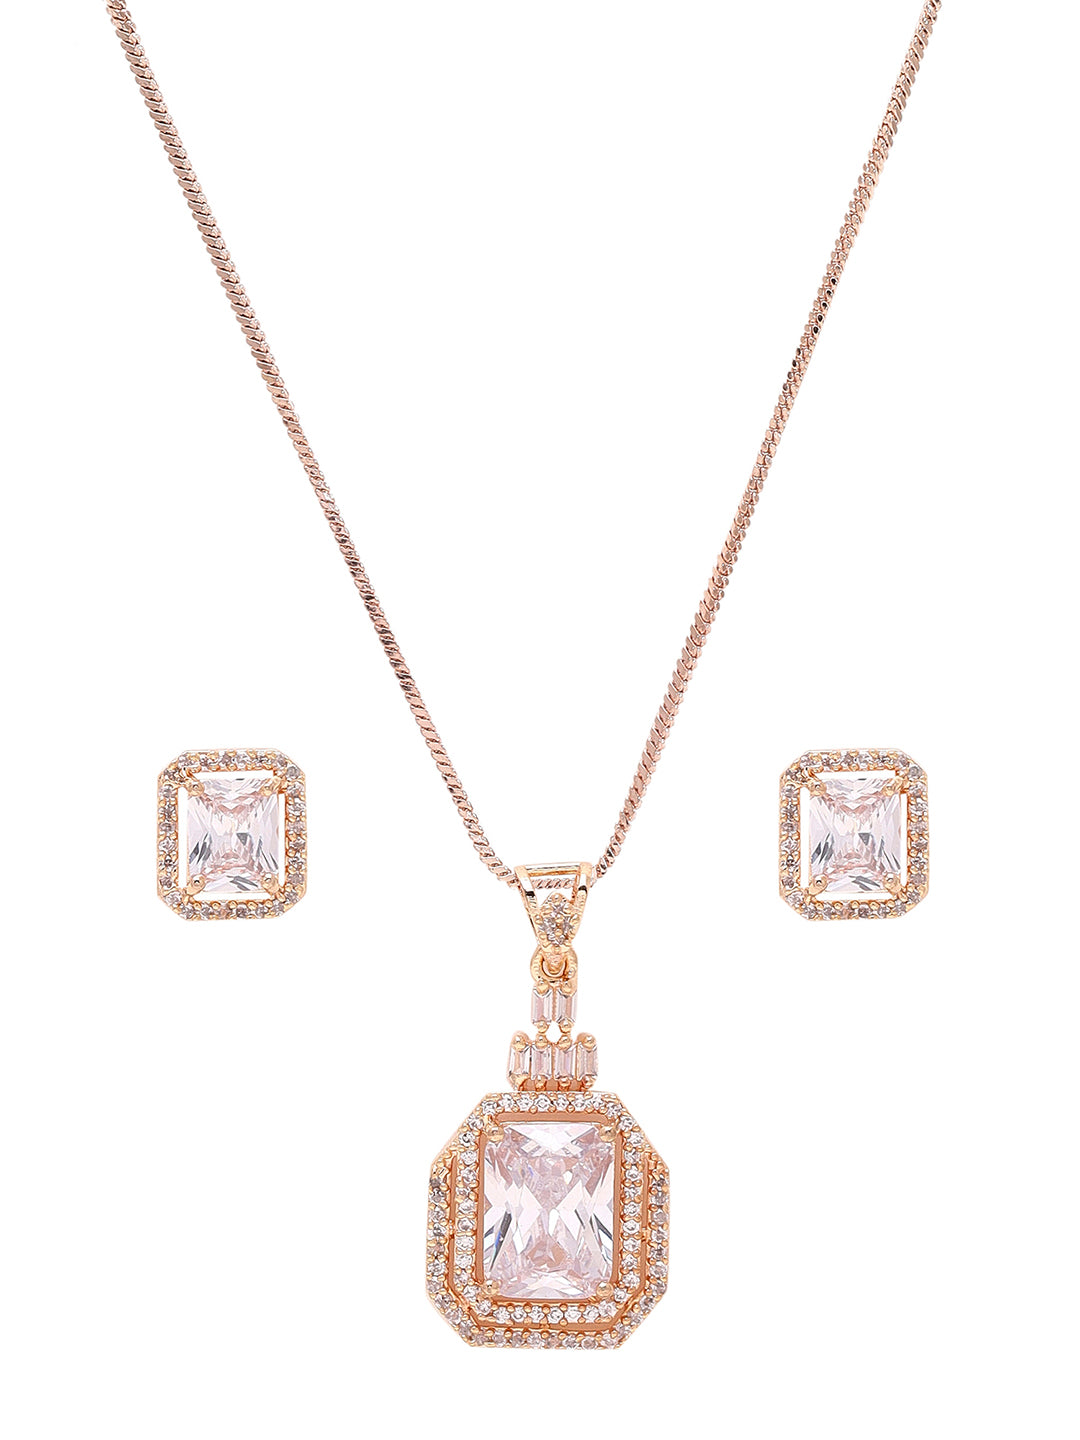 Priyaasi Radiant Rose Gold Plated American Diamond Jewellery Set with Exquisite Ring